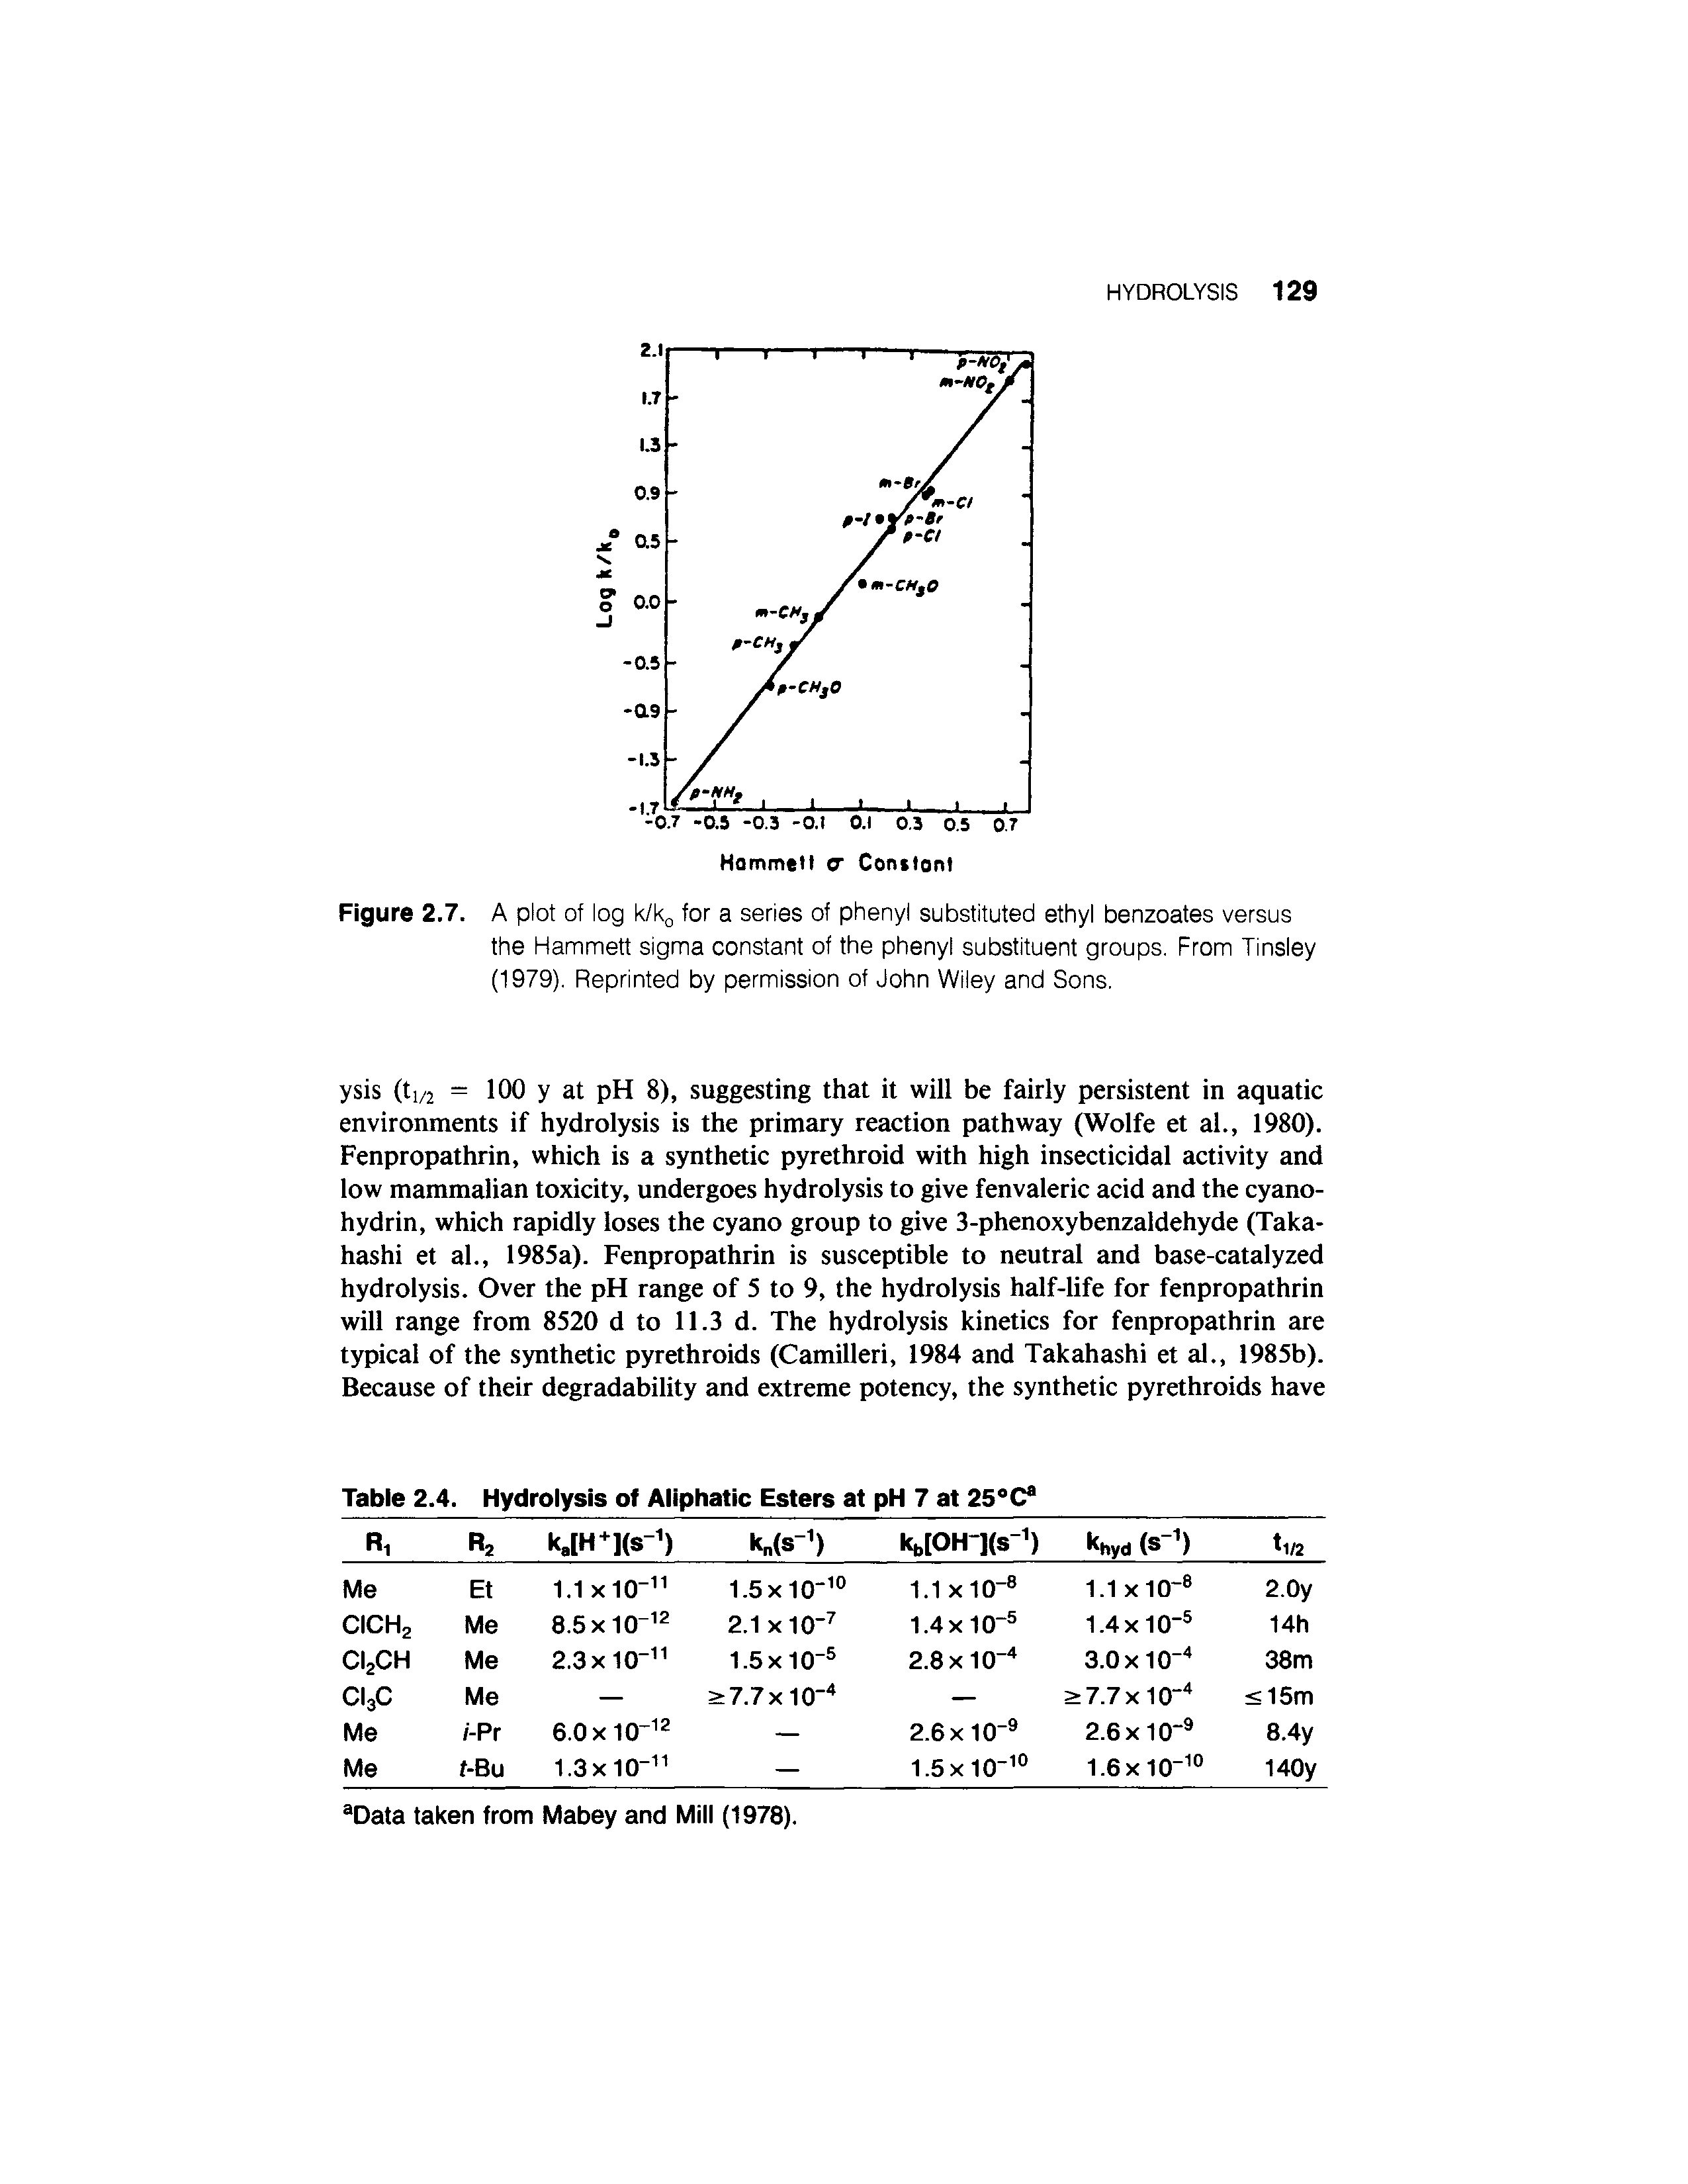 Figure 2.7. A plot of log k/kg for a series of phenyl substituted ethyl benzoates versus the Hammett sigma constant of the phenyl substituent groups. From Tinsley (1979). Reprinted by permission of John Wiley and Sons.